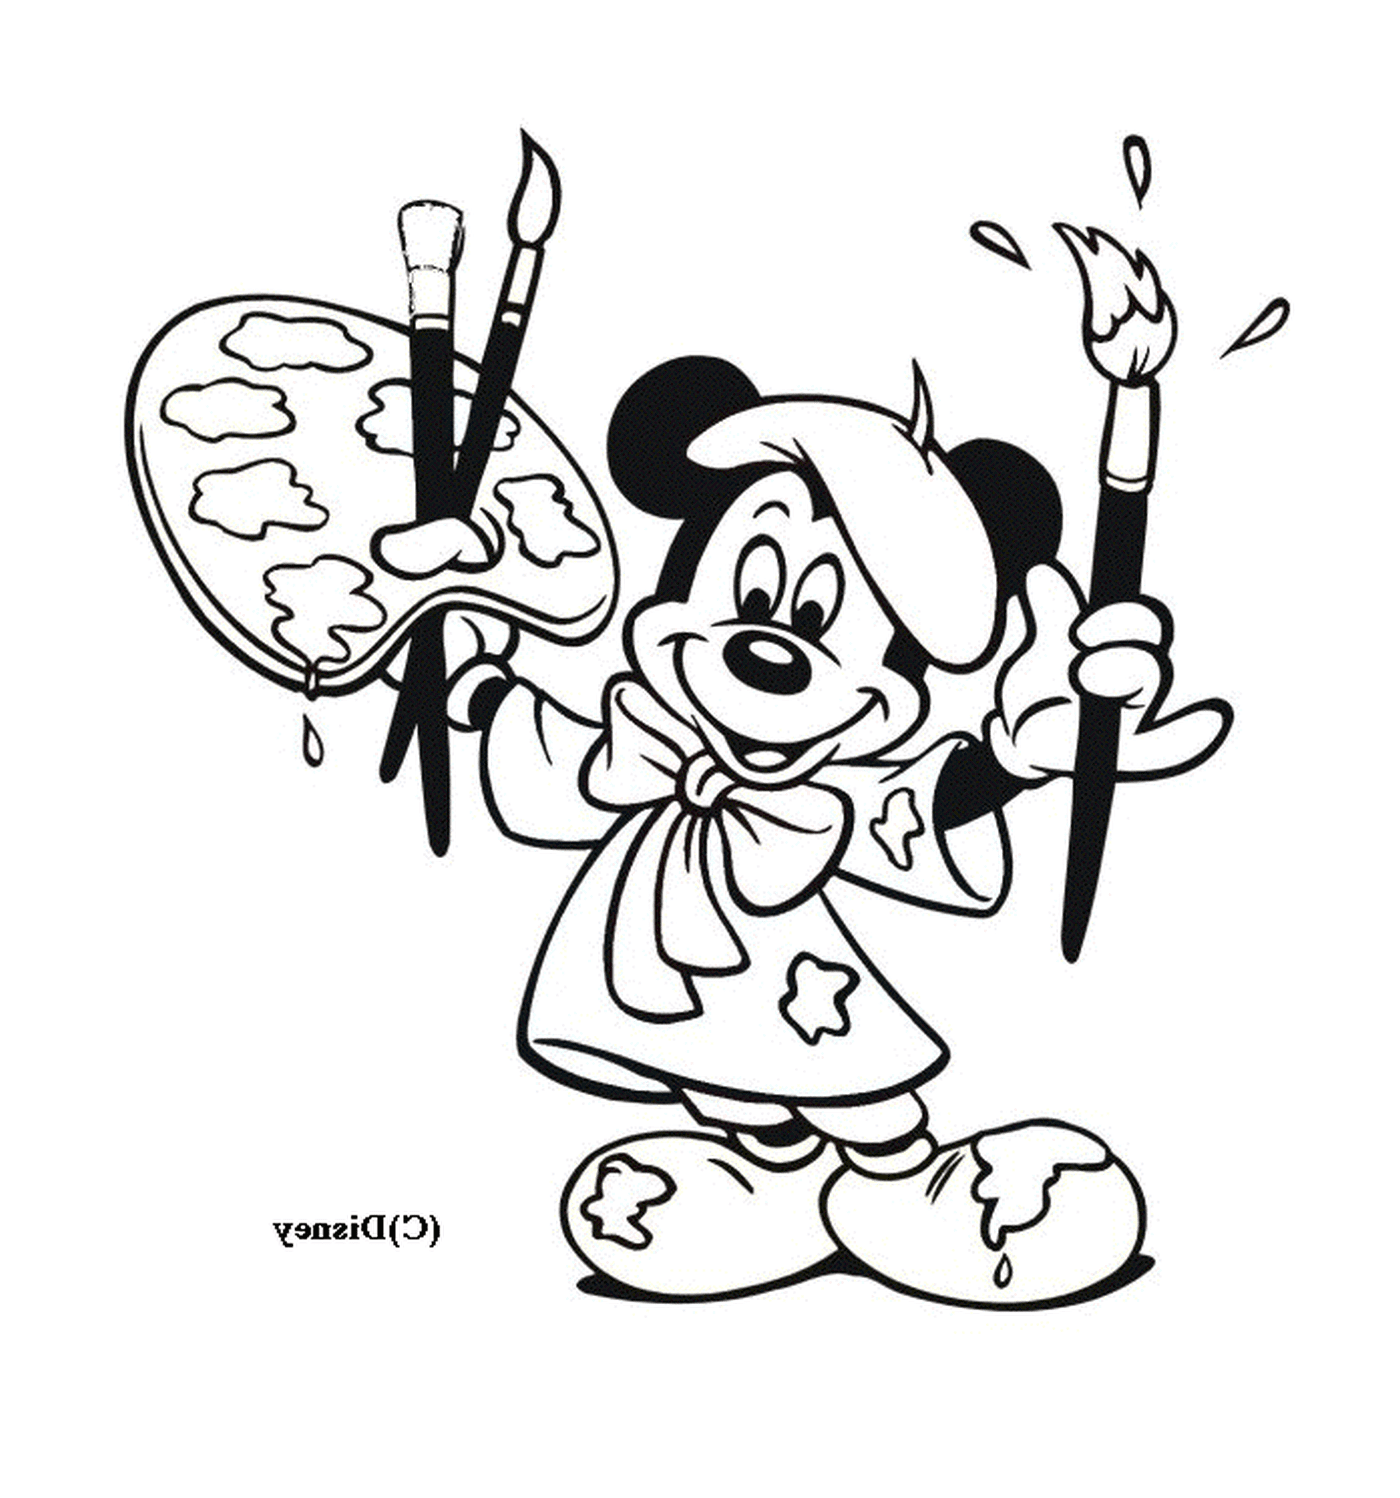  Mickey is a painter: holding brushes and a easel 